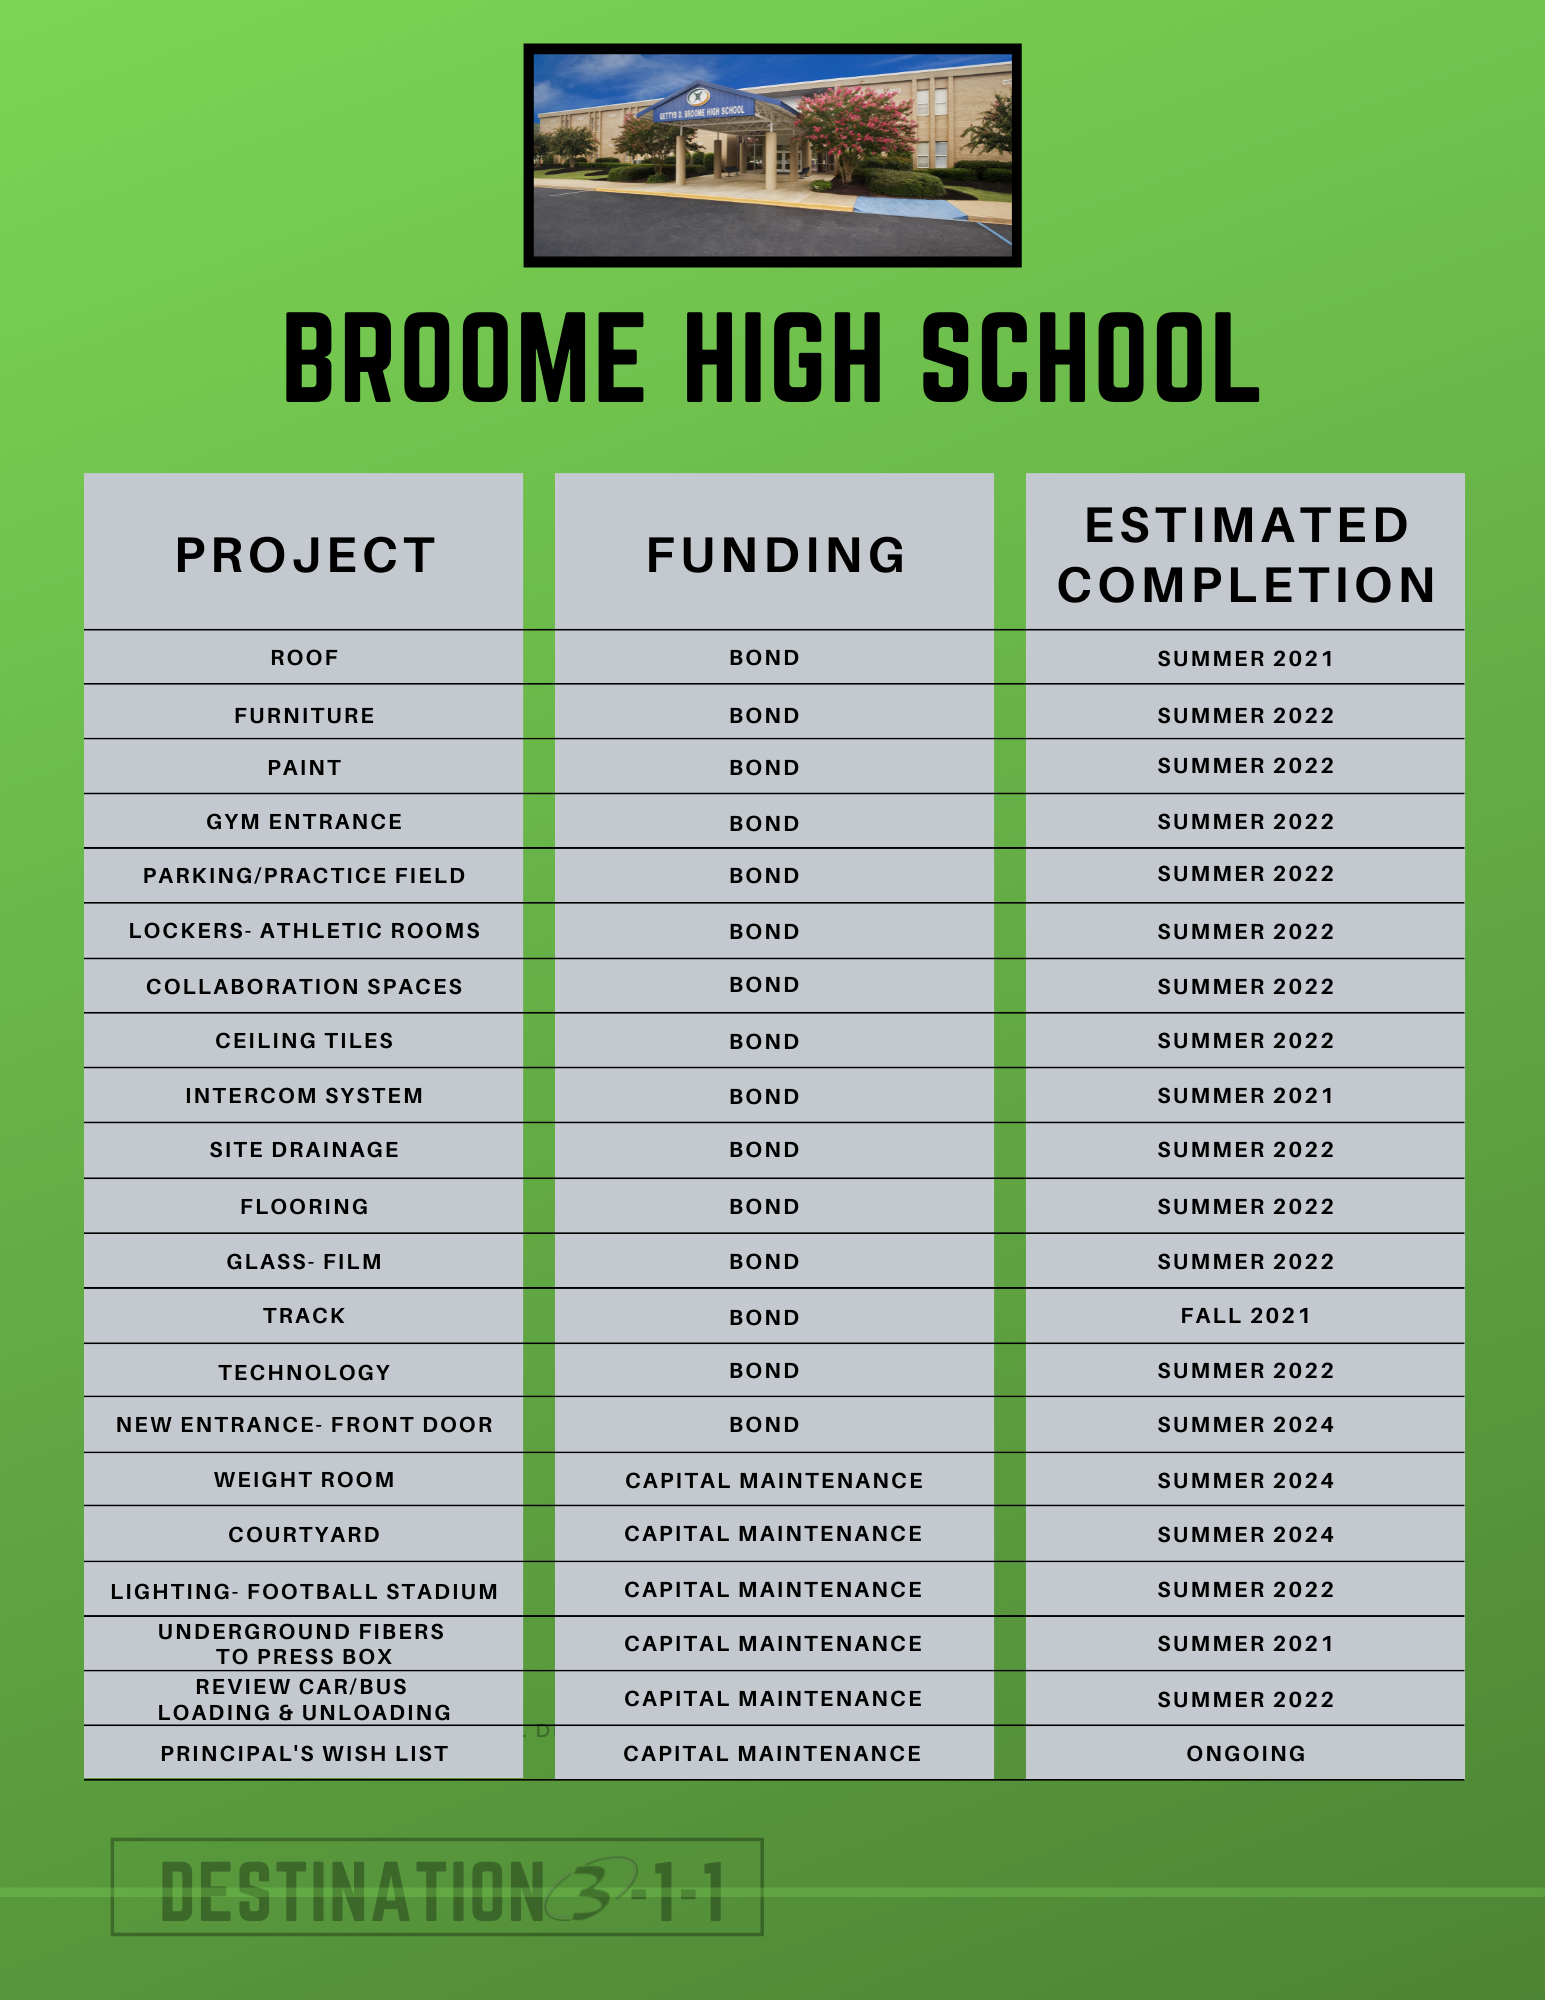 Broome high  information about projects and funding sources